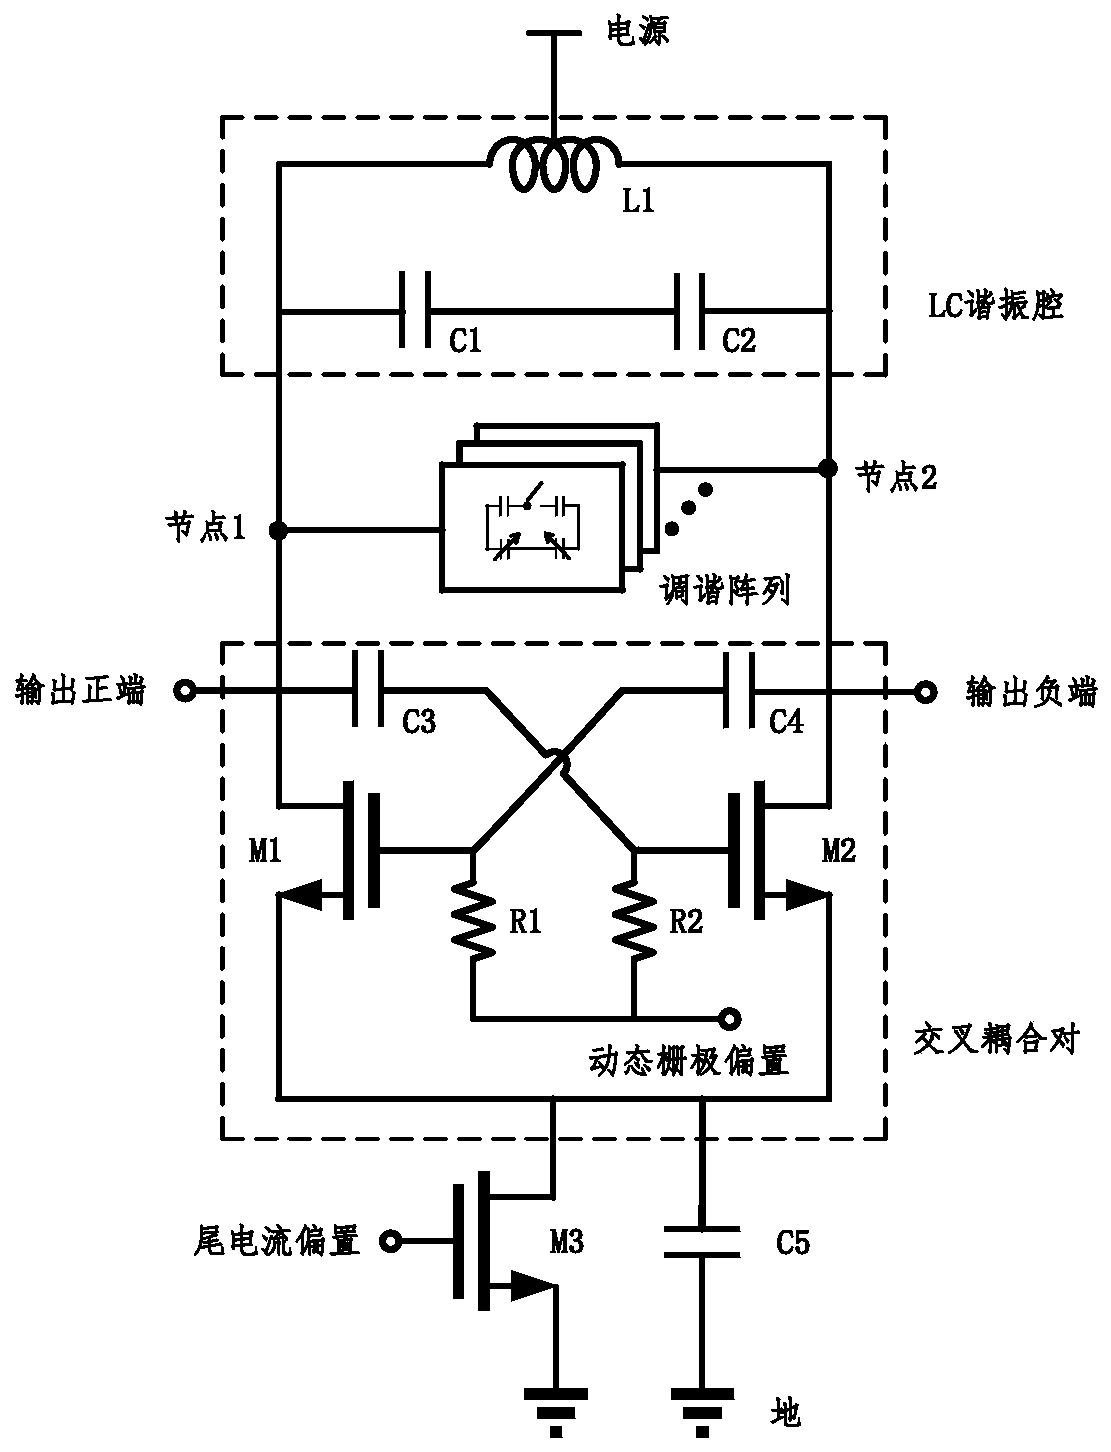 LC voltage-controlled oscillator with dynamic bias adjustment